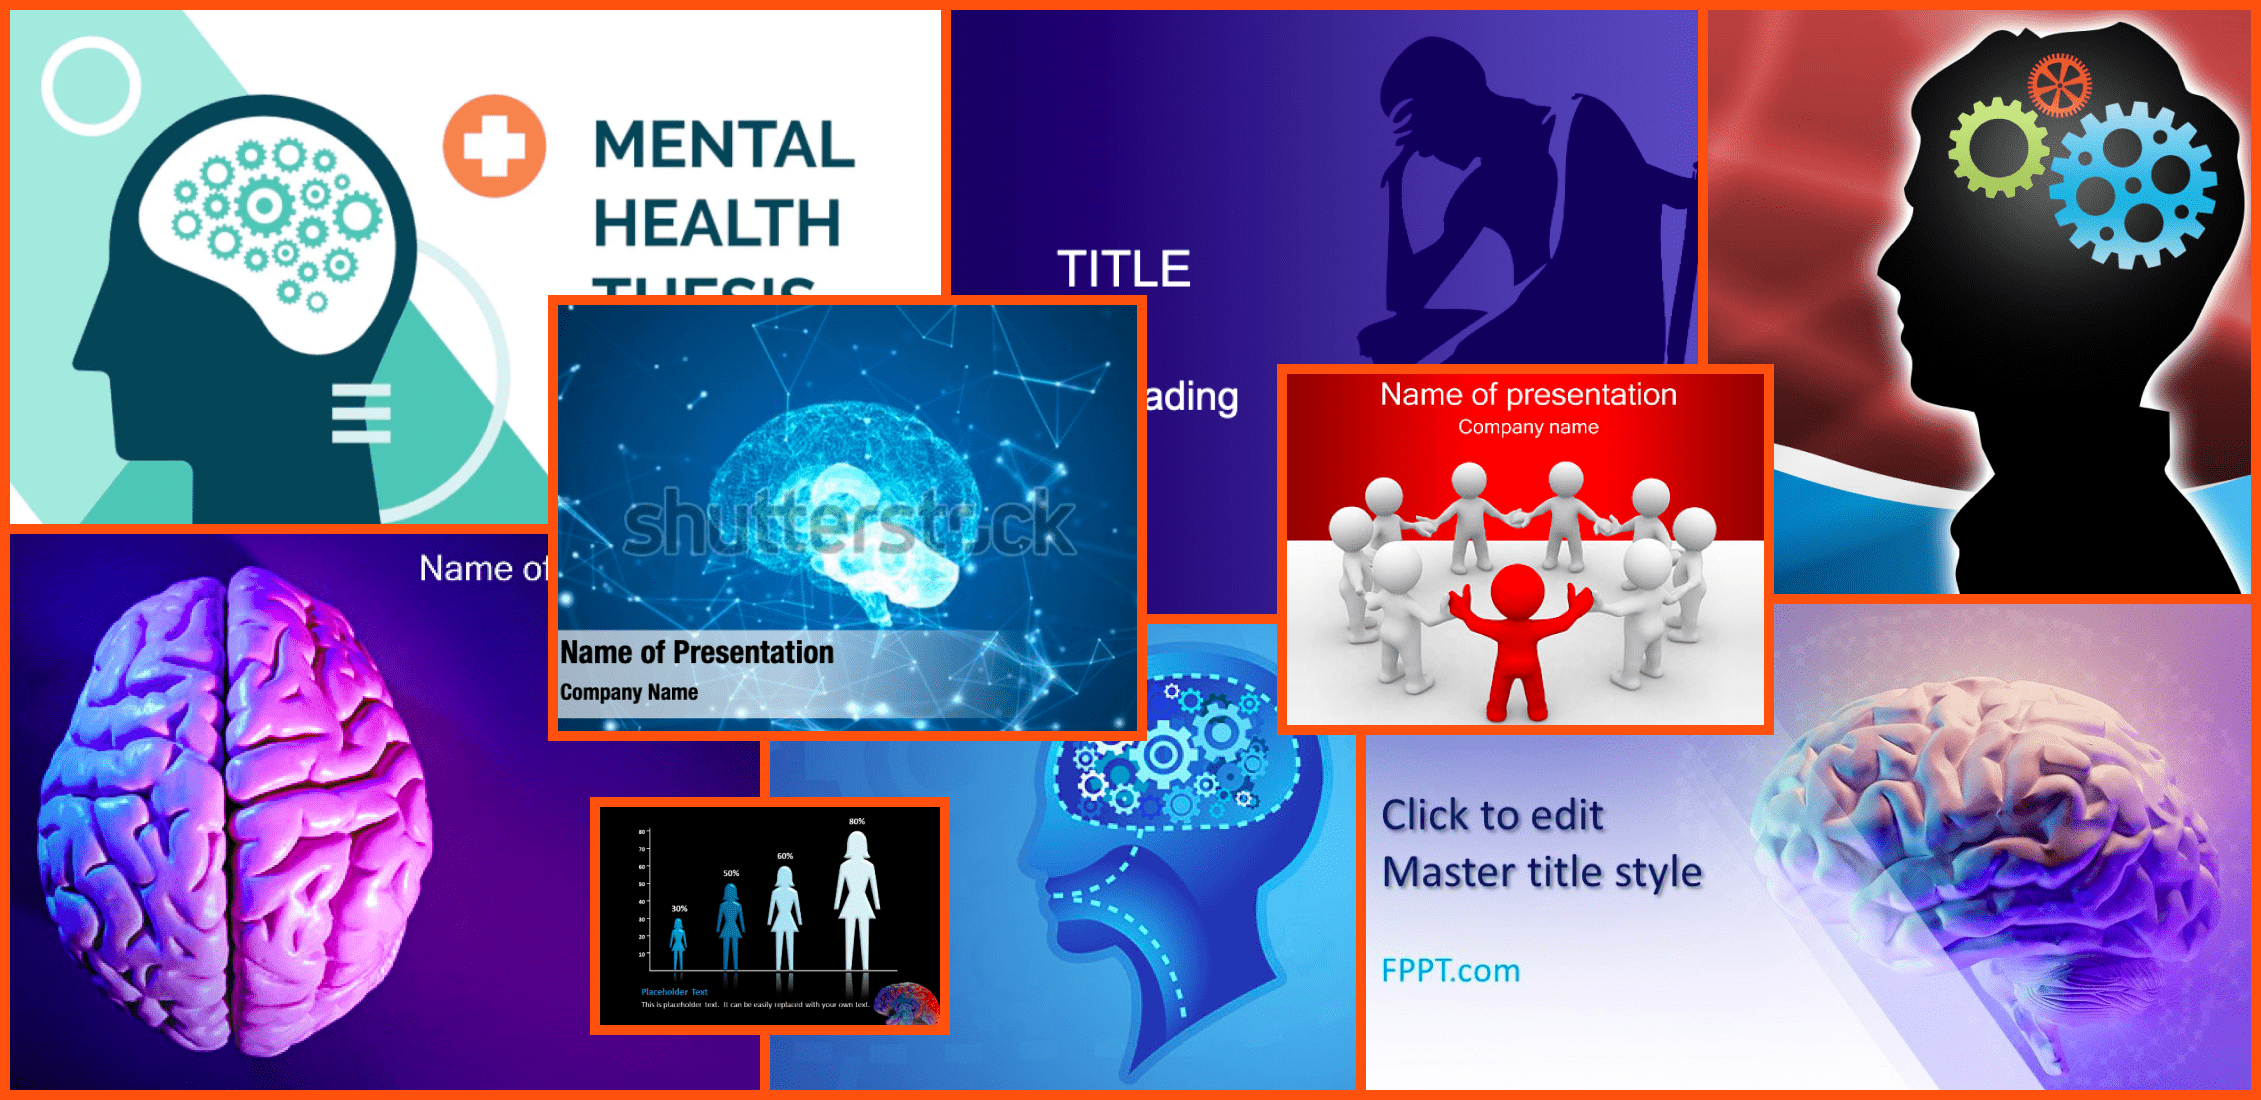 Best Psychology Powerpoint Templates Example.